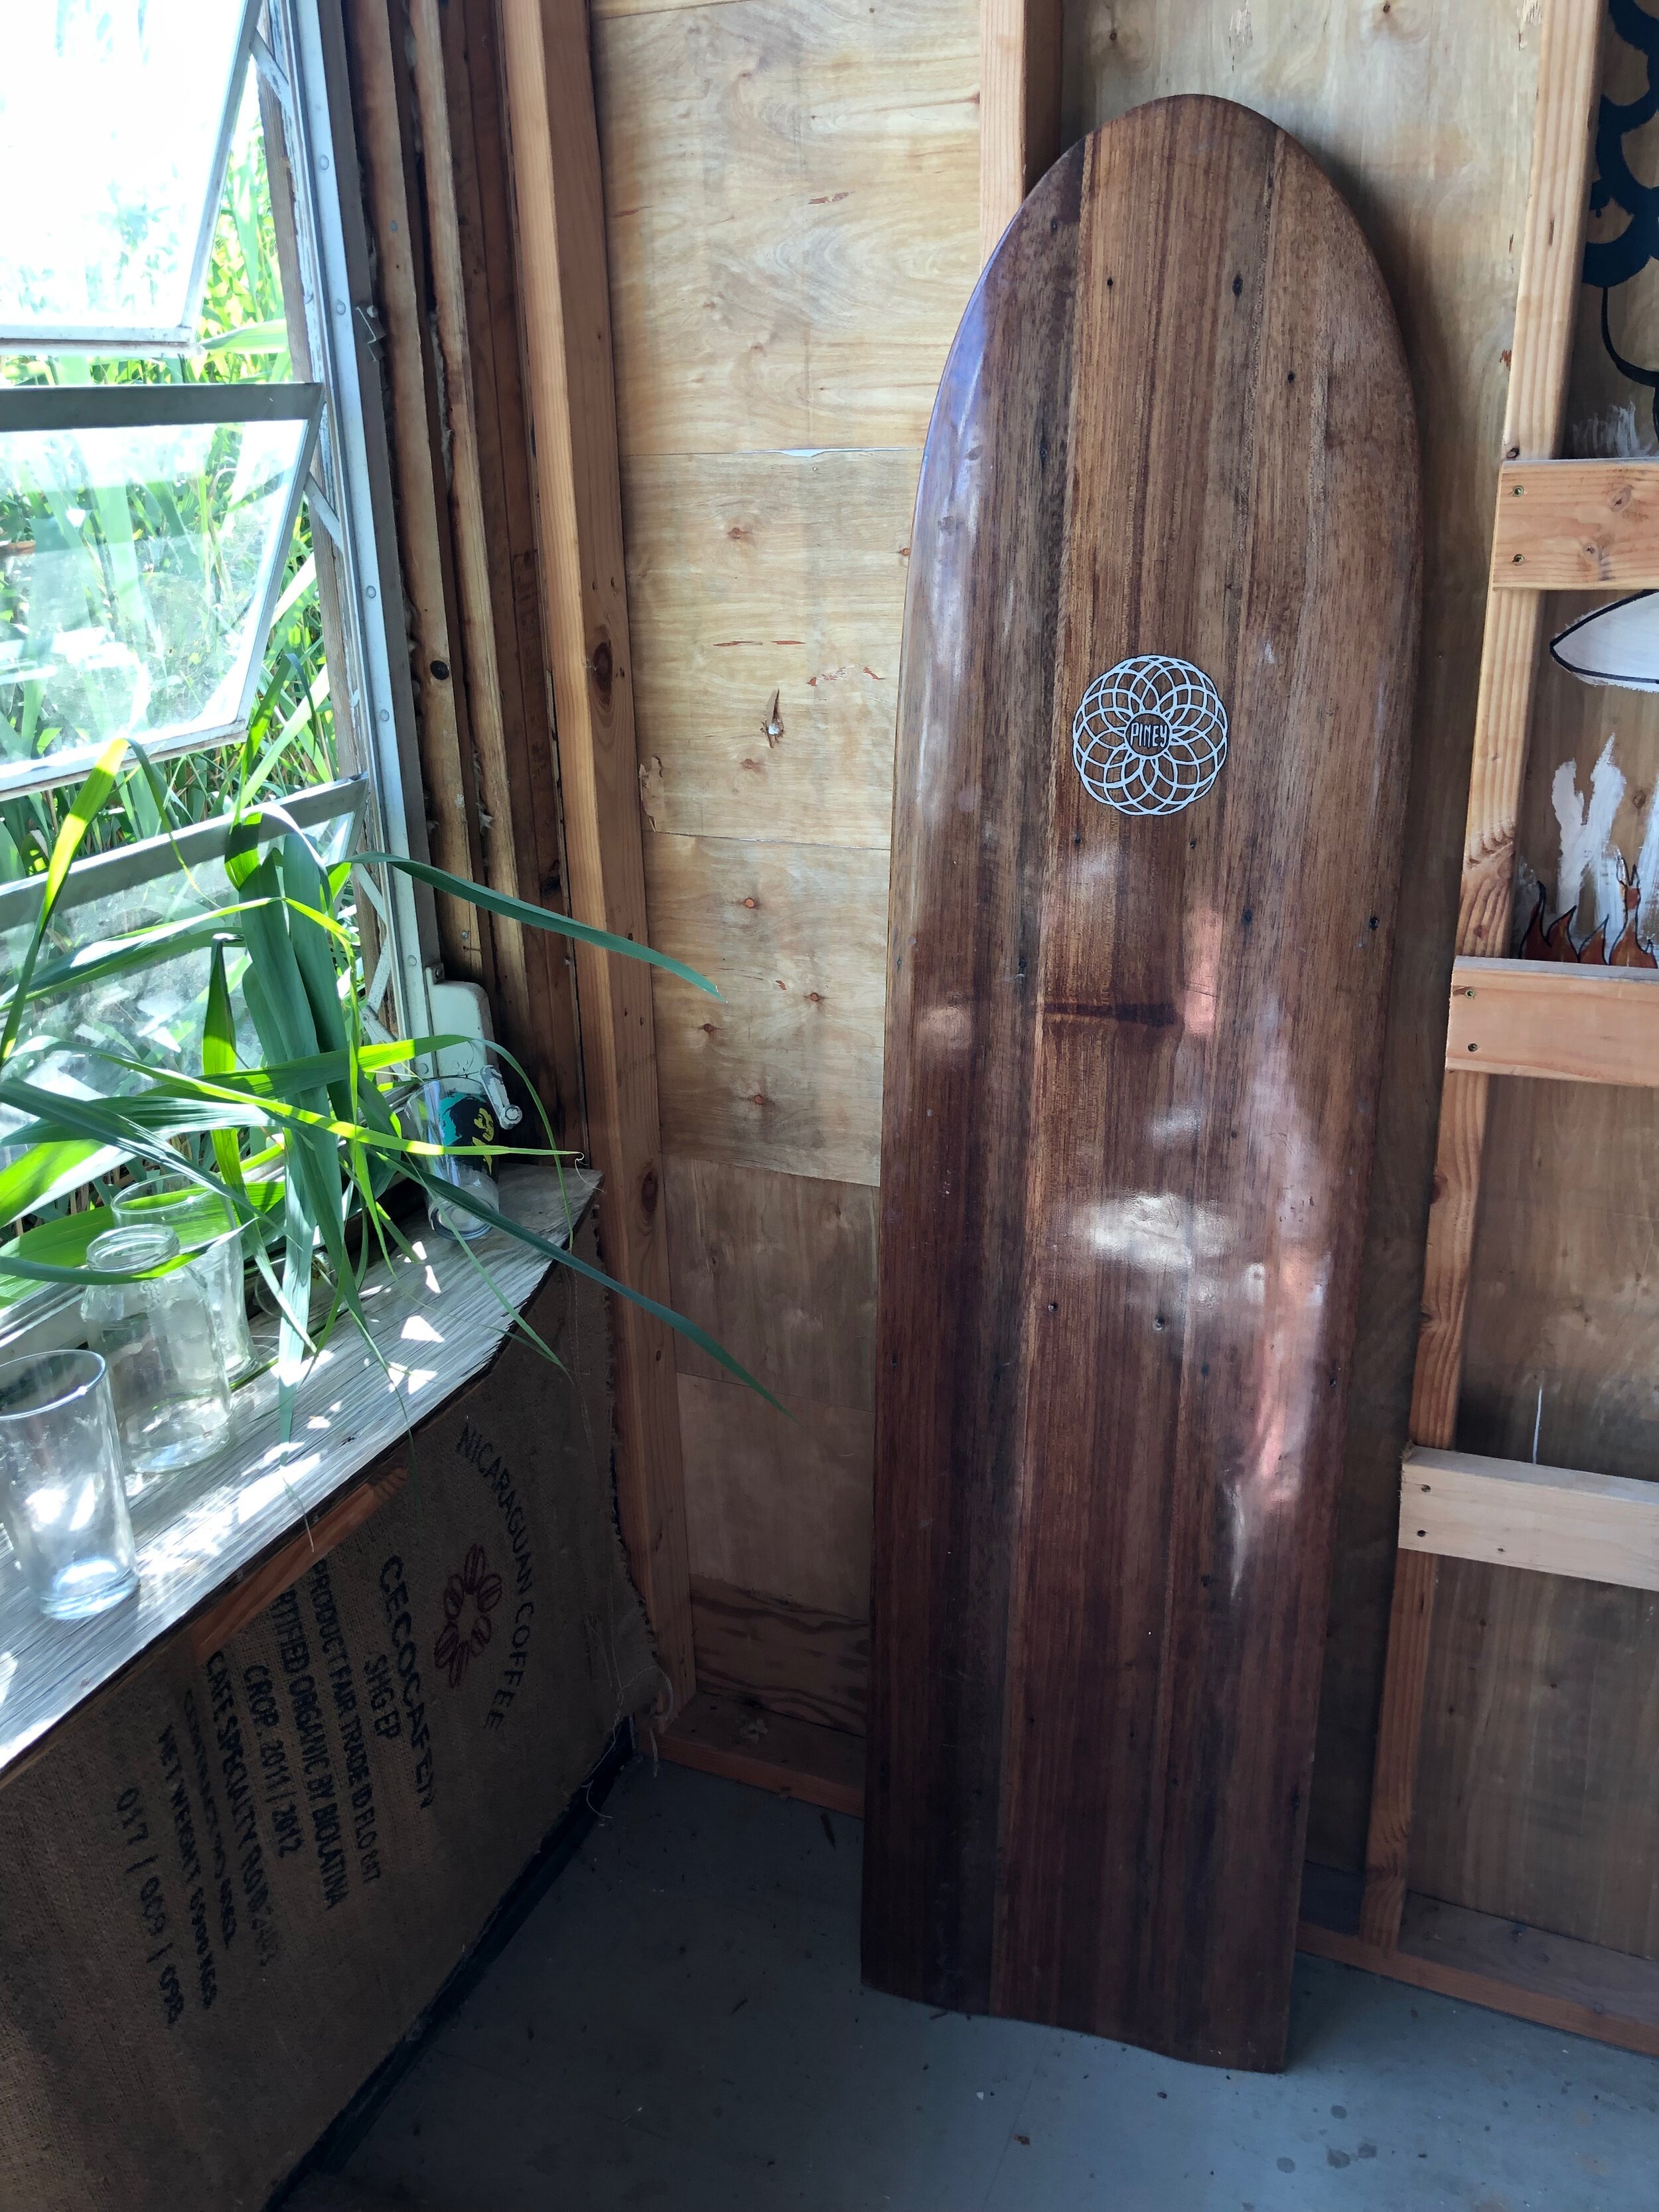 An alaia board (a traditional flat wooden Hawaiian surfboard with no fins) that Carney shaped. 